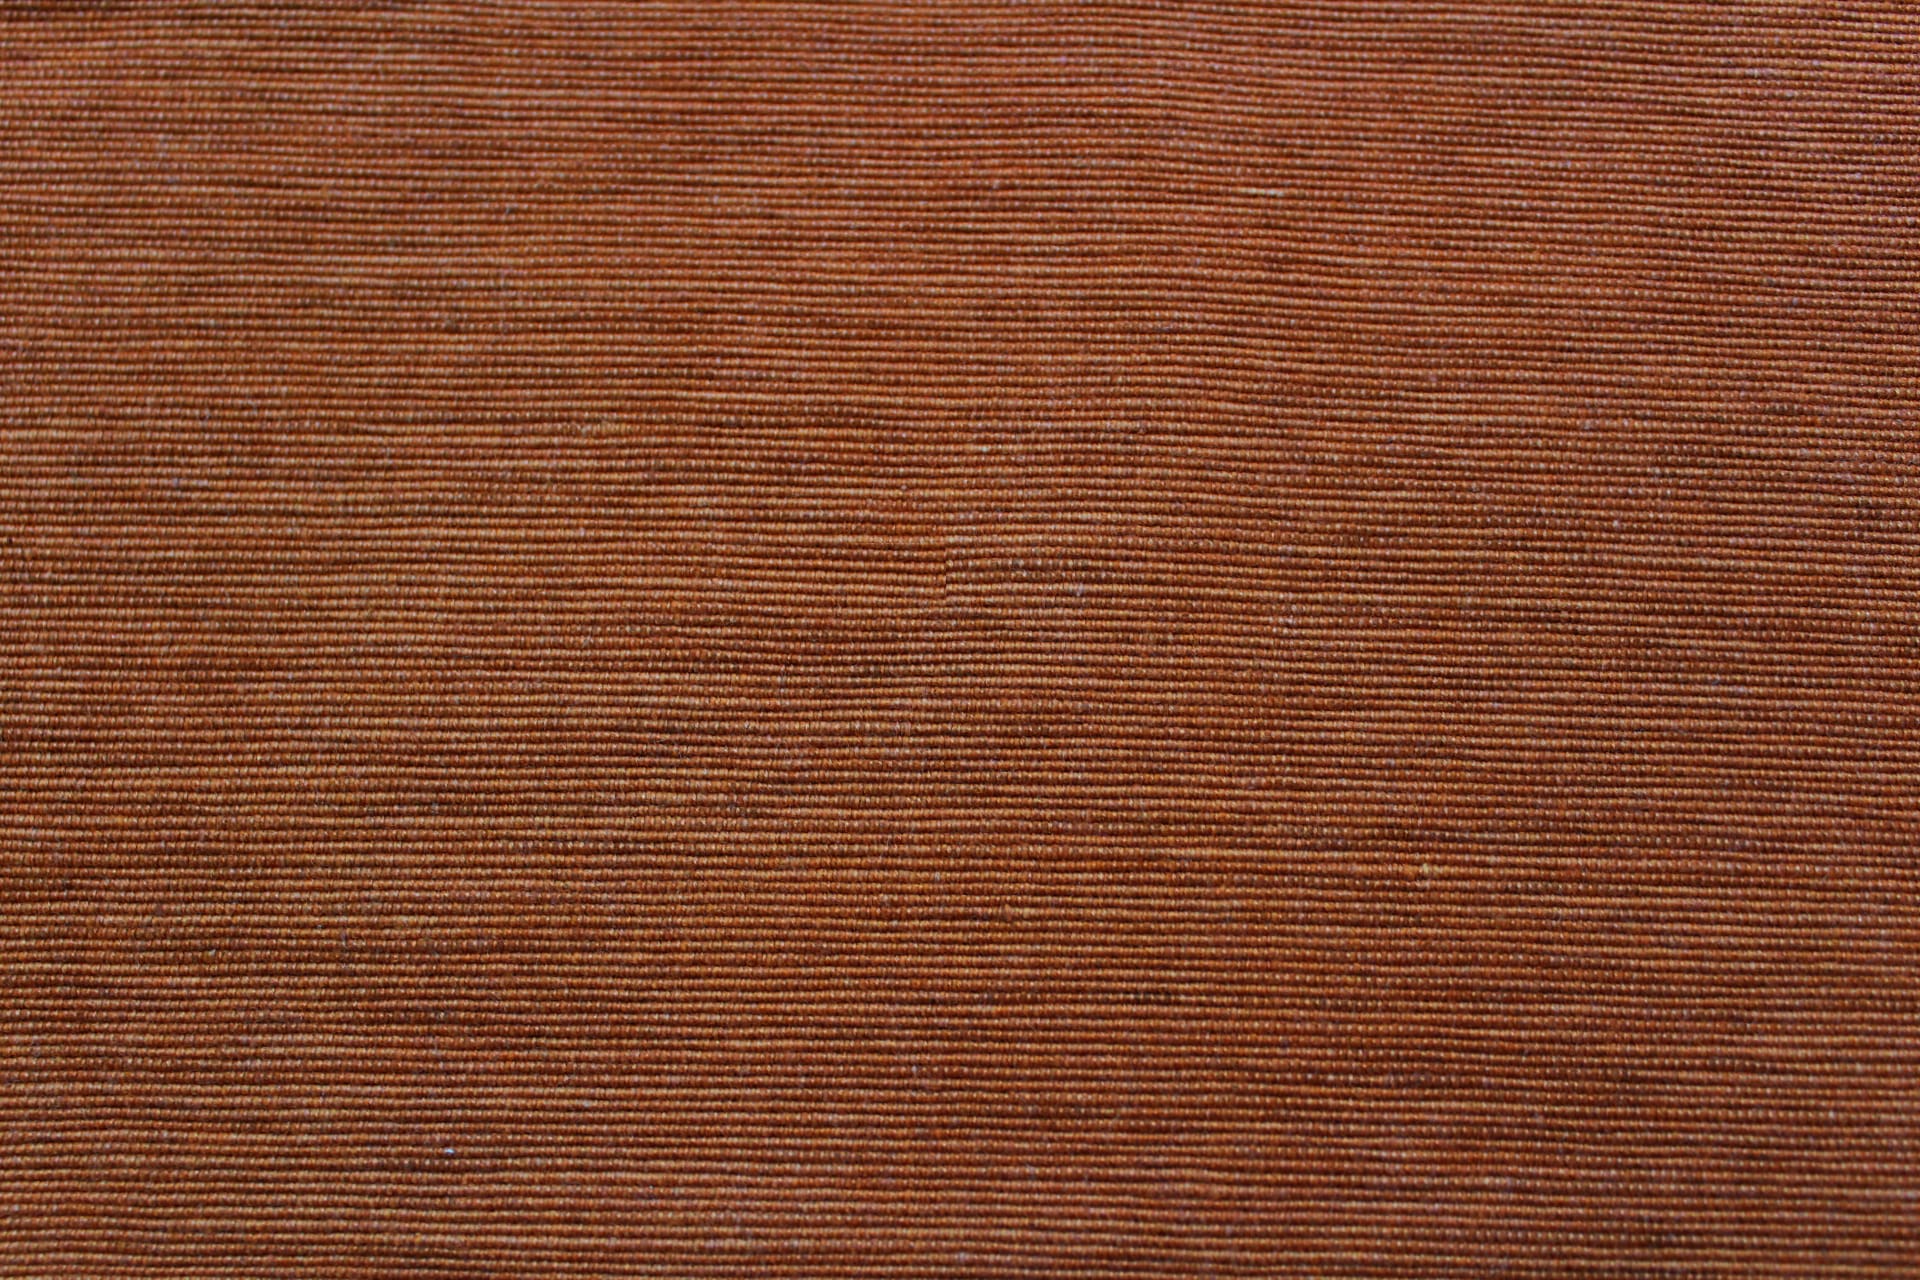 Rust Handloom Corded Weave 330 GSM Plain Cotton Fabric (122 cms) online in India